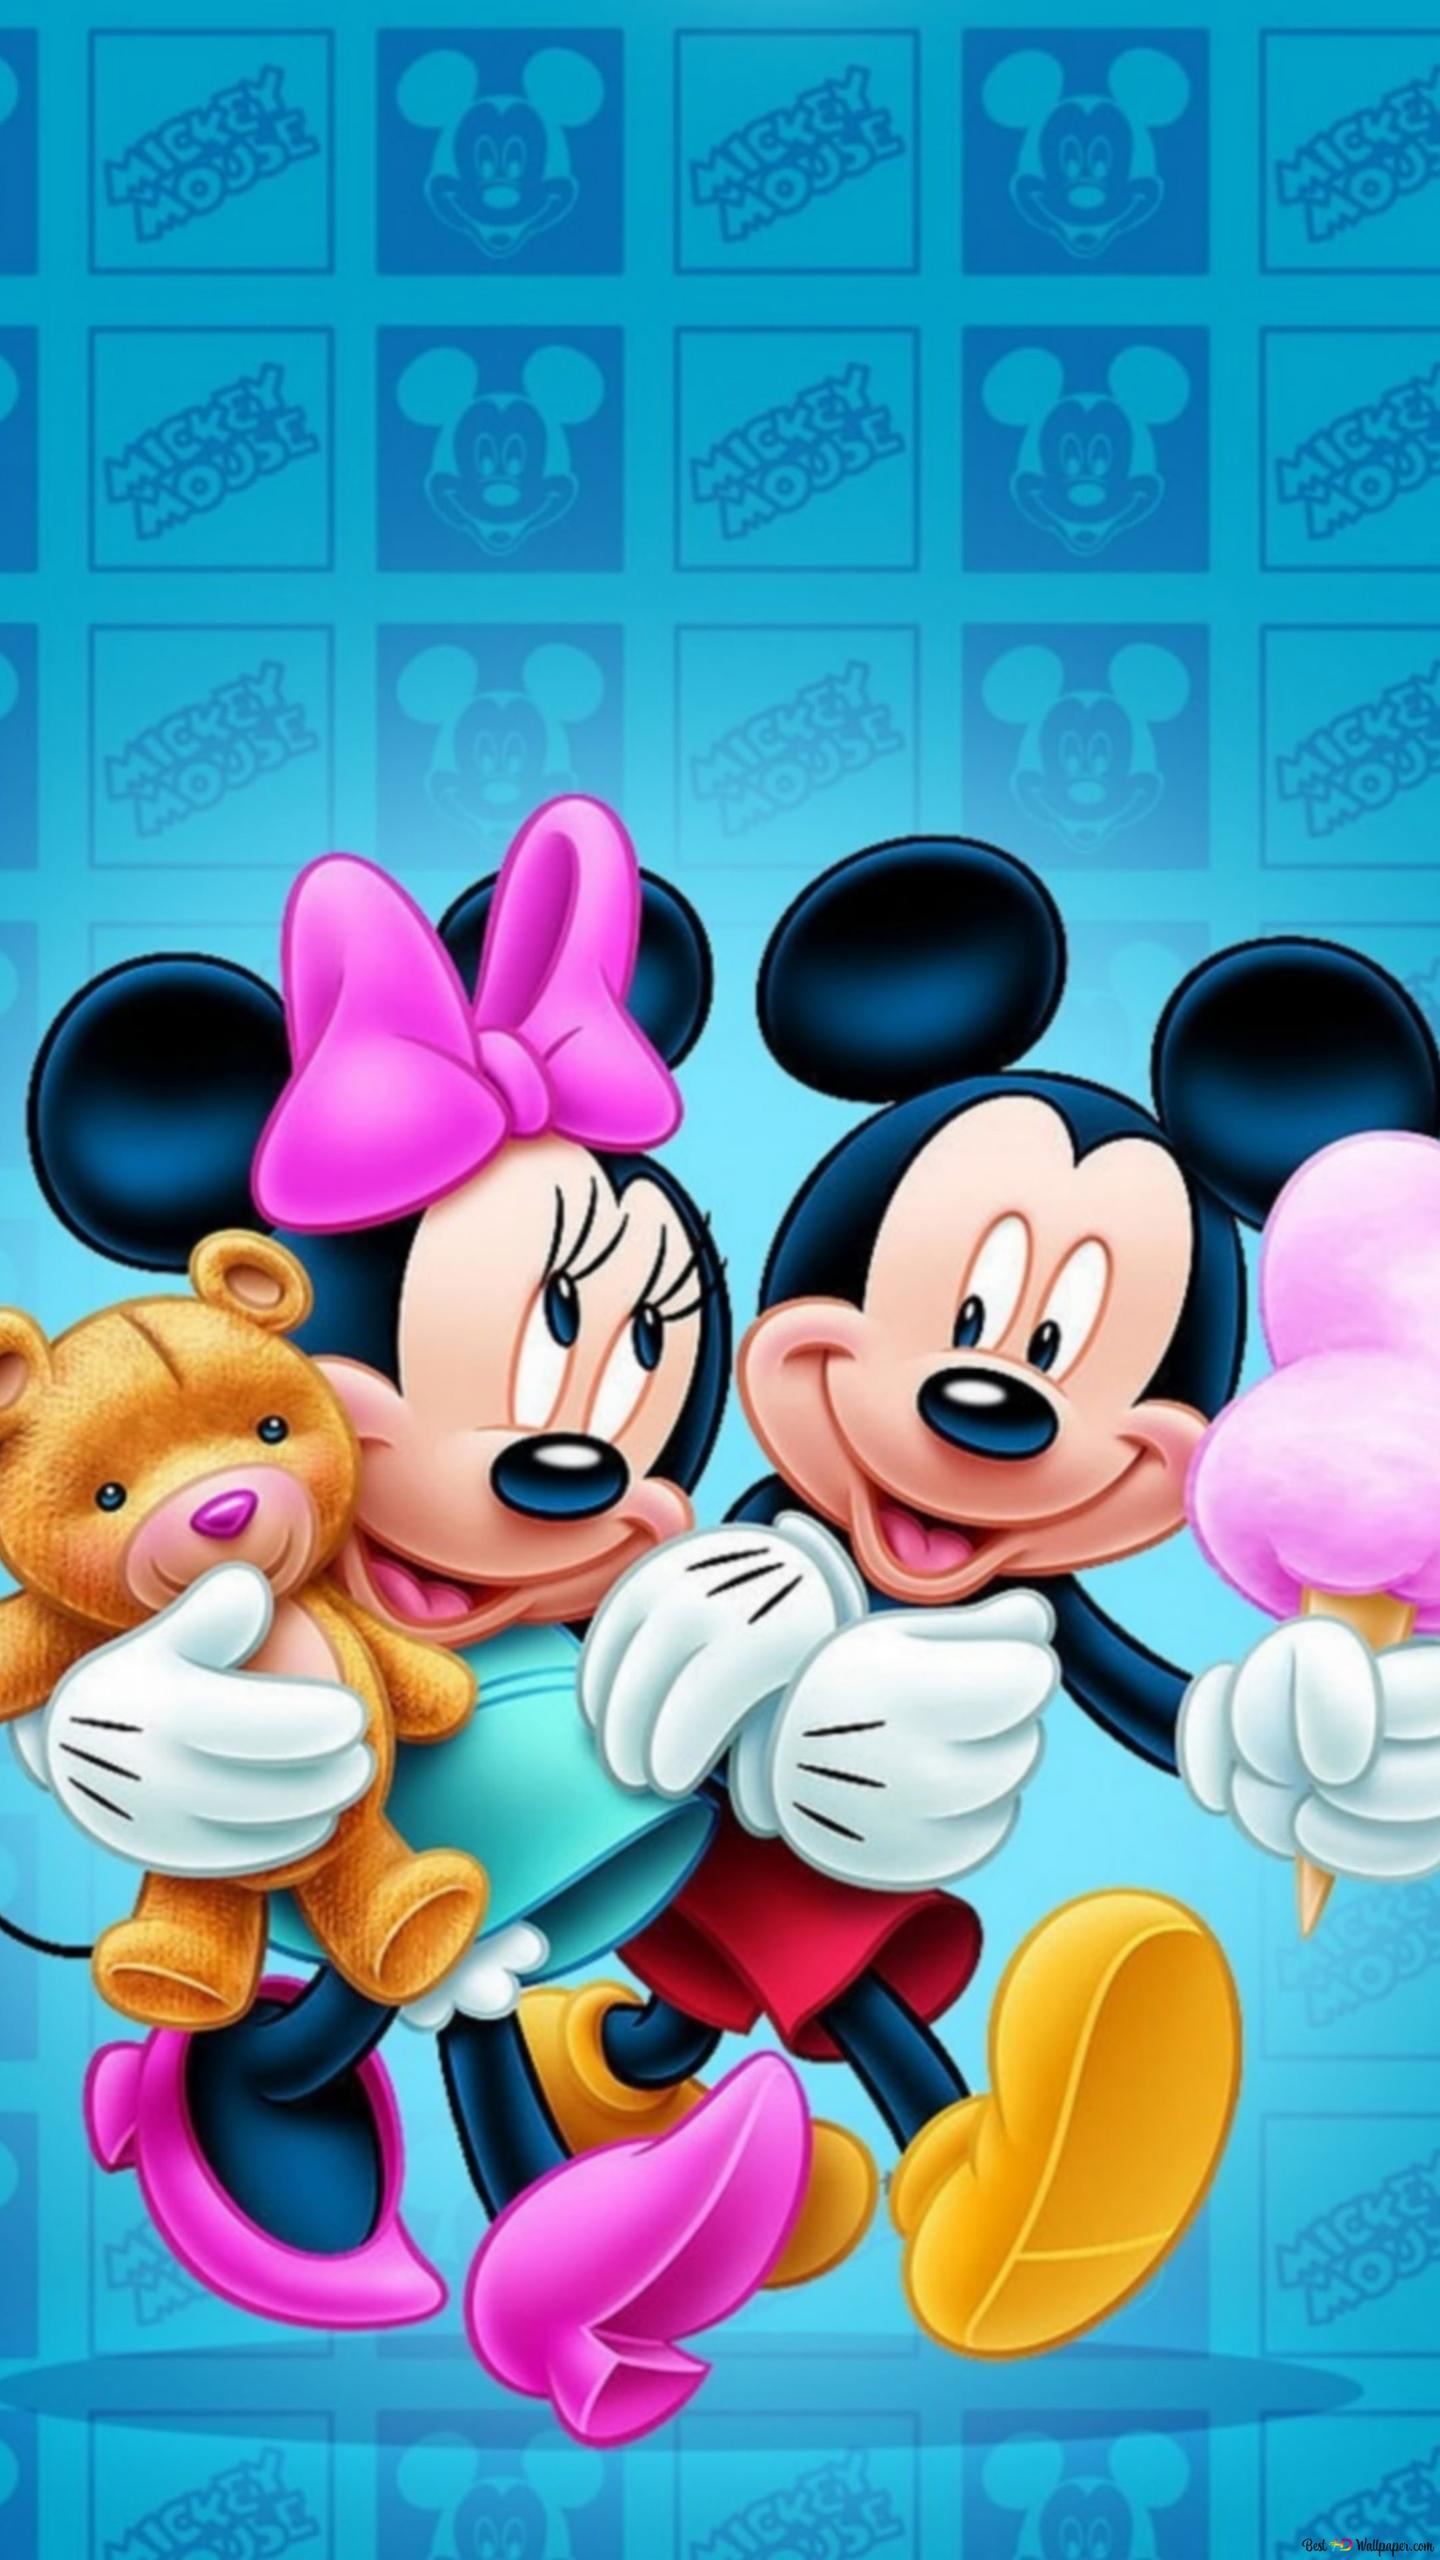 Mickey and Minnie with teddy bear 2K wallpaper download